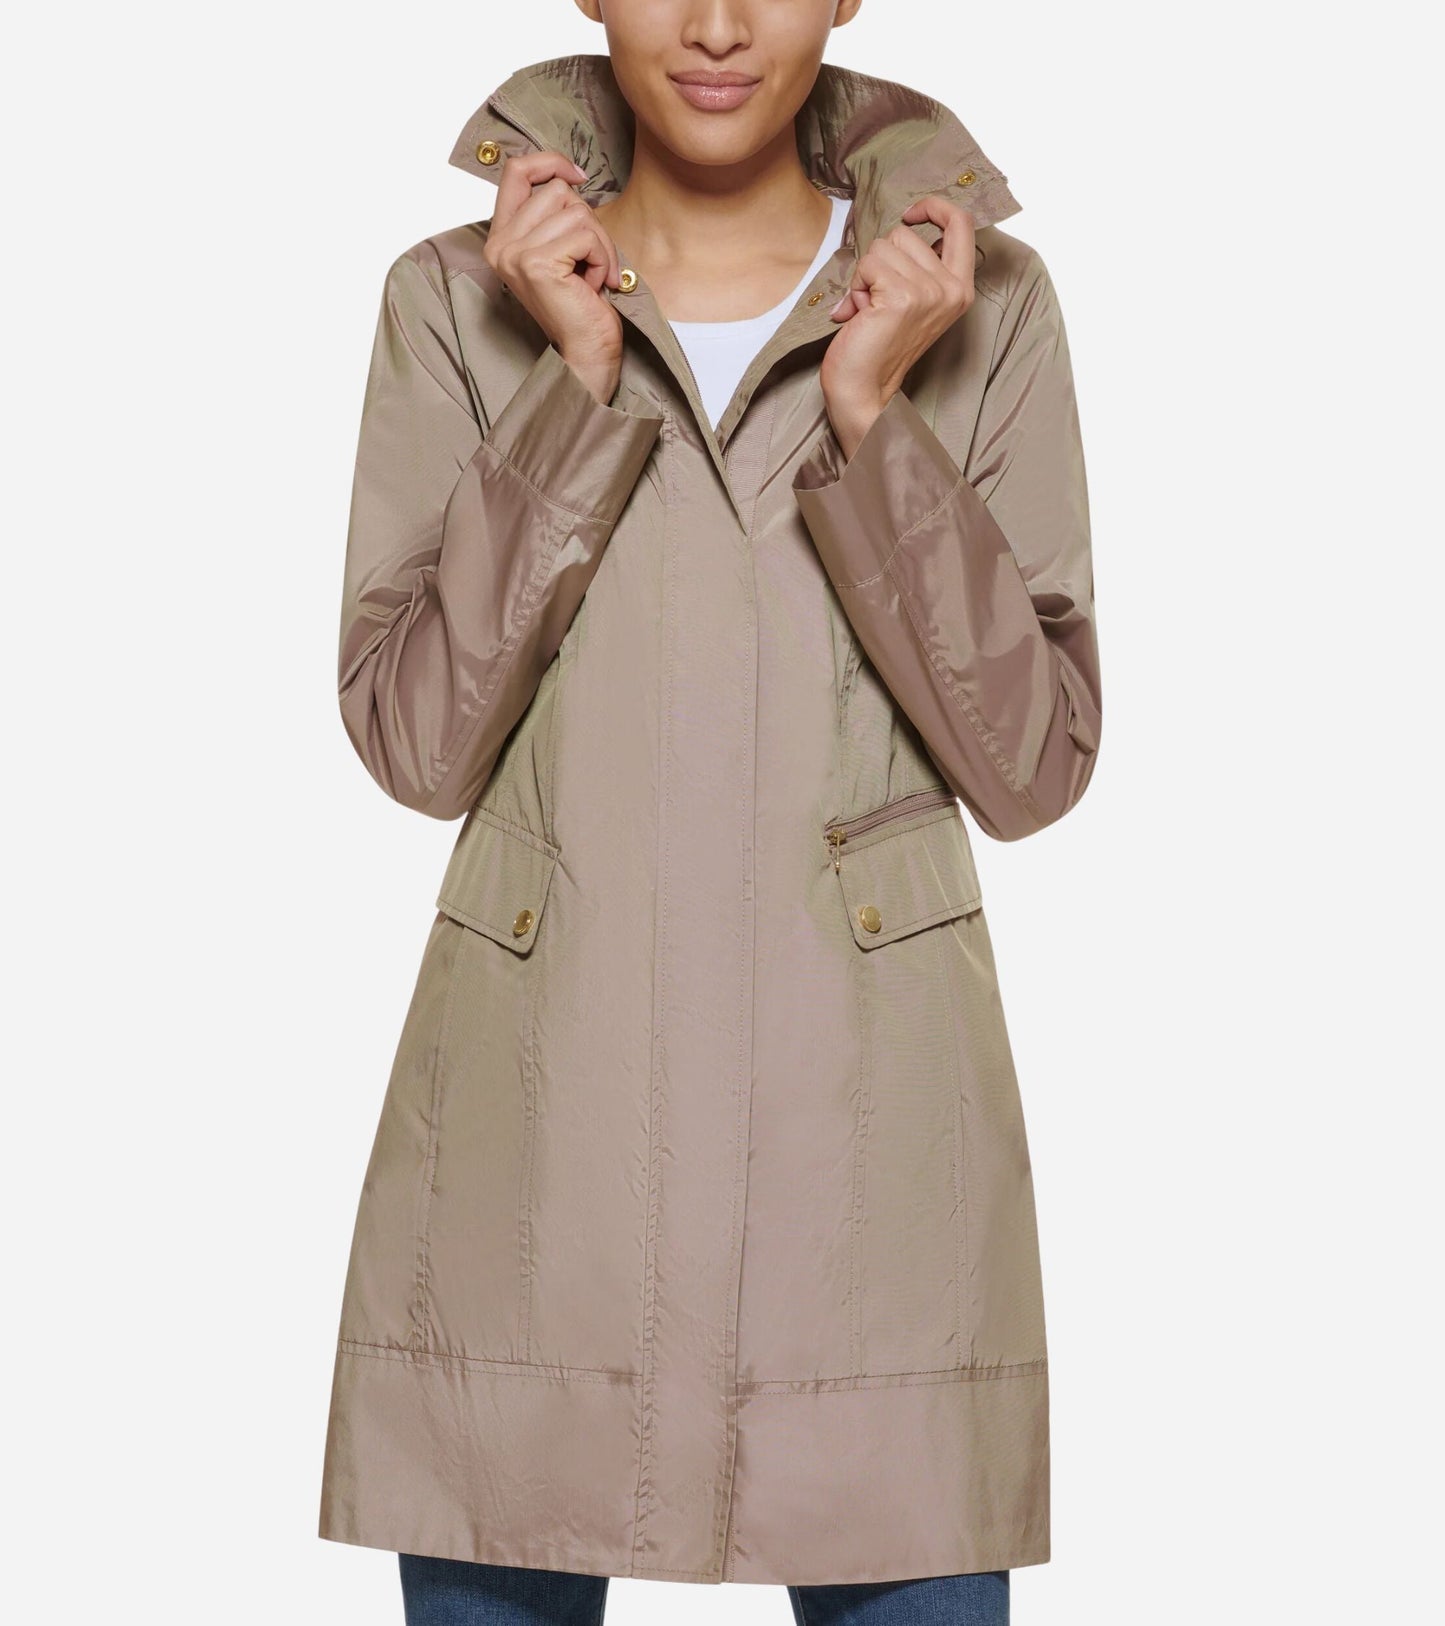 Women's Packable Hooded Rain Jacket with Bow (8014439940343)